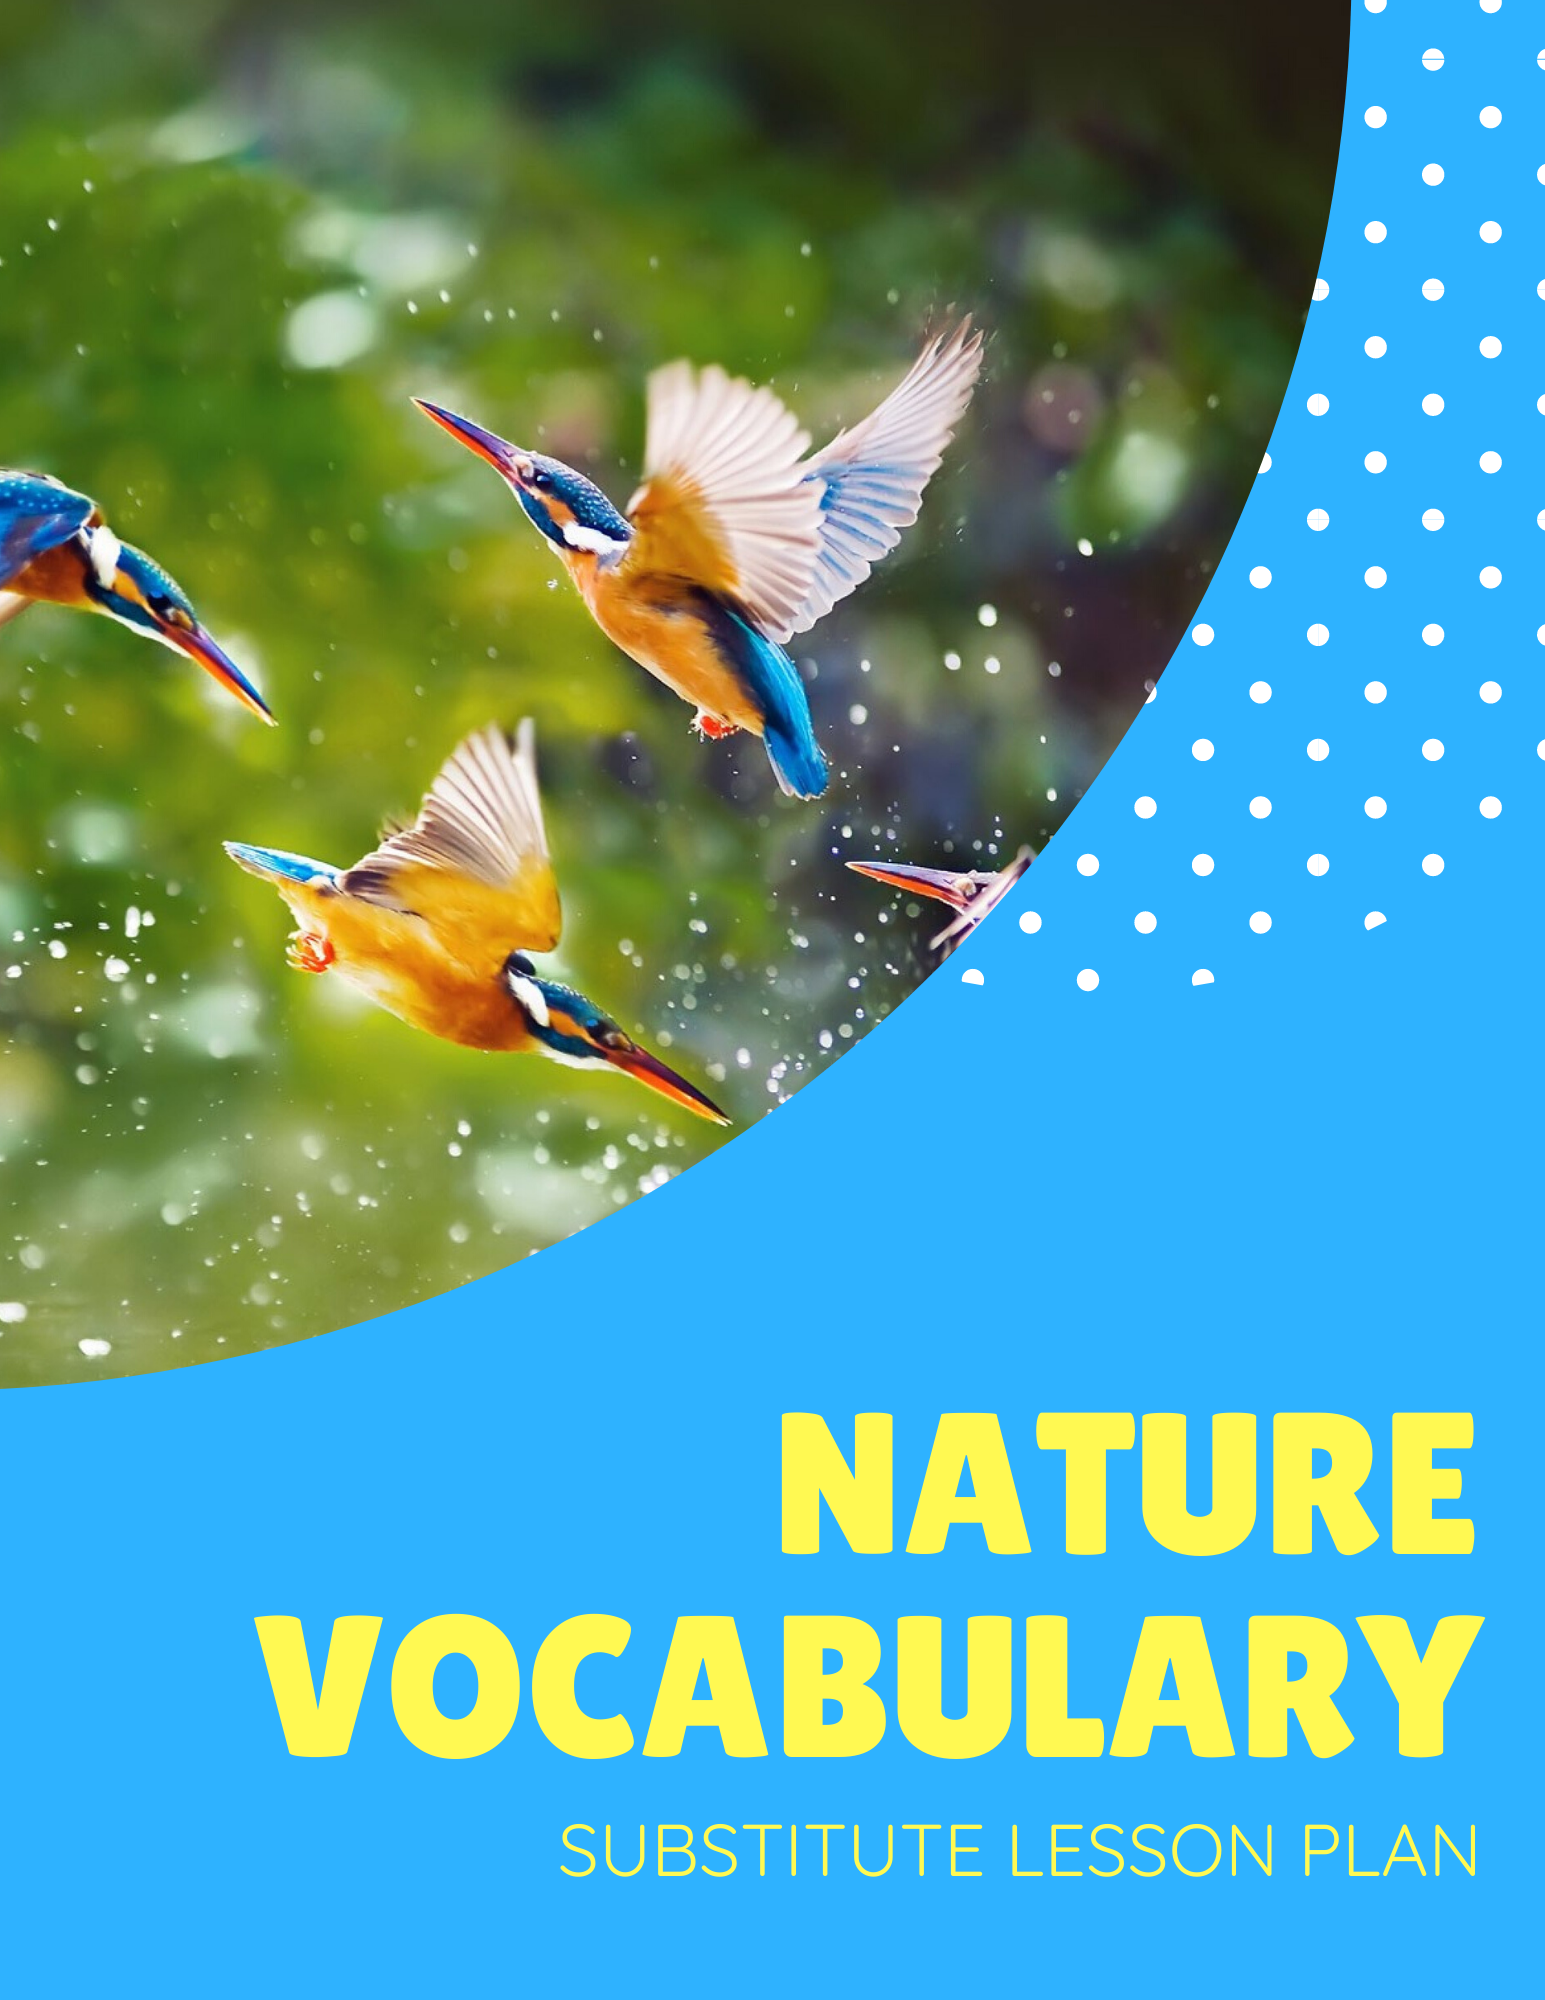 Practice with Nature Vocabulary and Verbs with Nina Simone’s “Feeling Good” Substitute Lesson Plan